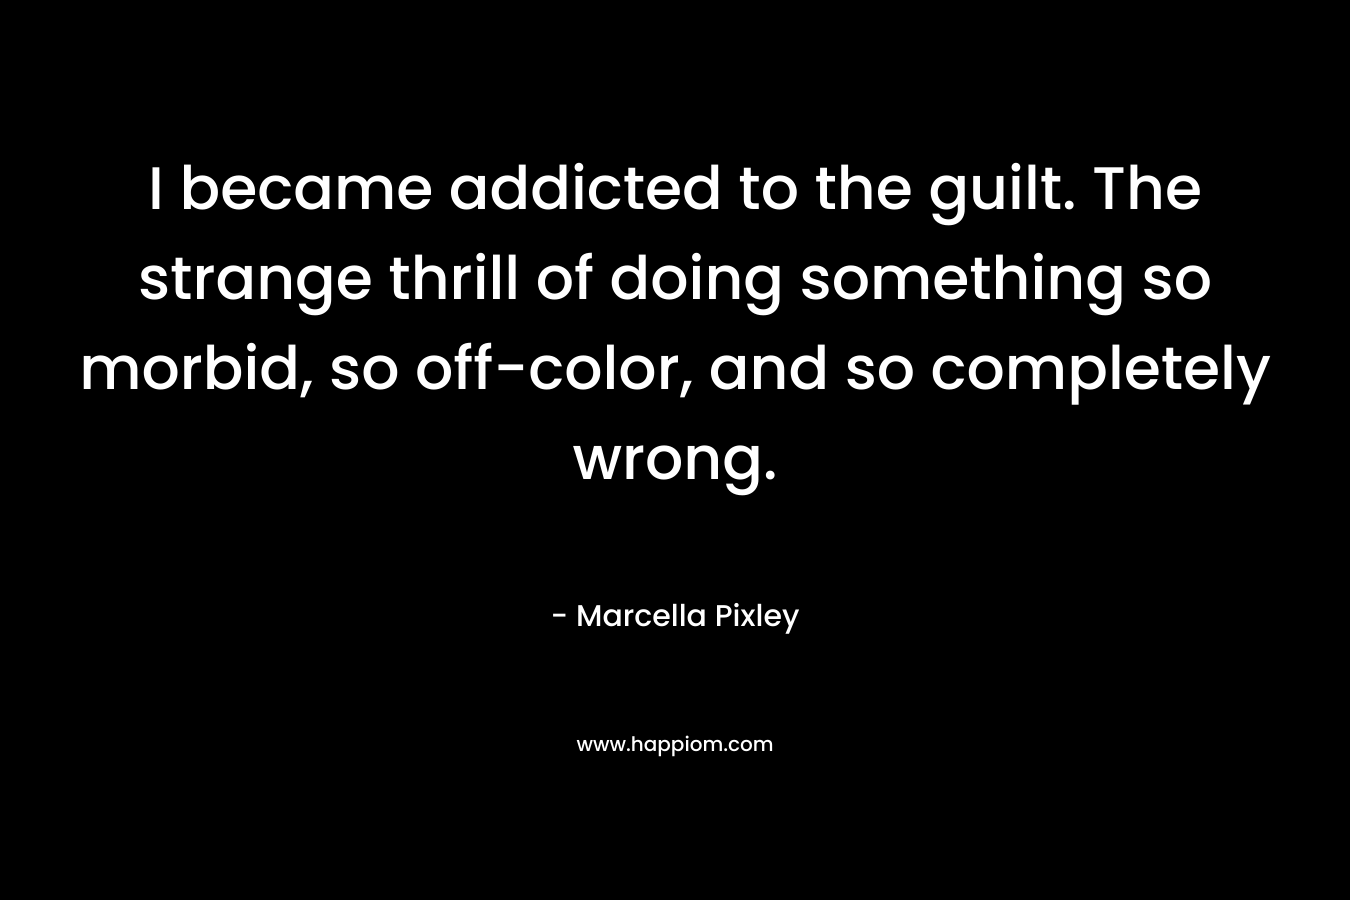 I became addicted to the guilt. The strange thrill of doing something so morbid, so off-color, and so completely wrong. – Marcella Pixley